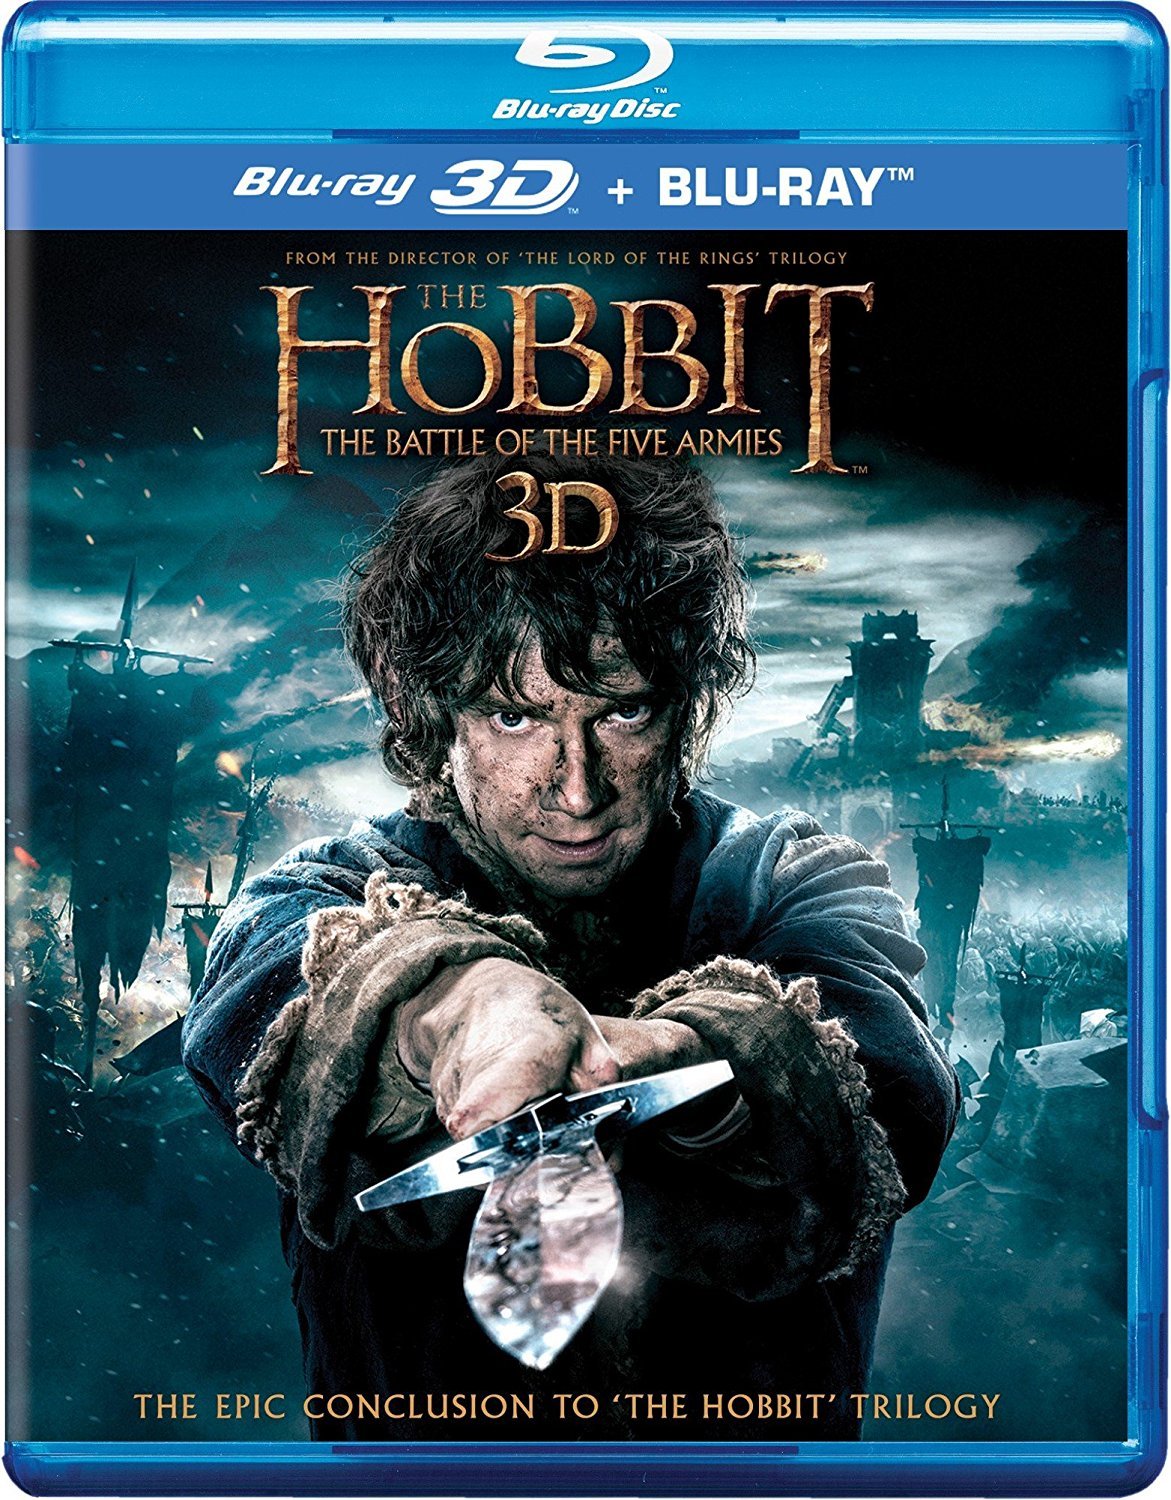 the-hobbit-the-battle-of-the-five-armies-blu-ray-3d-blu-ray-4-disc-box-set